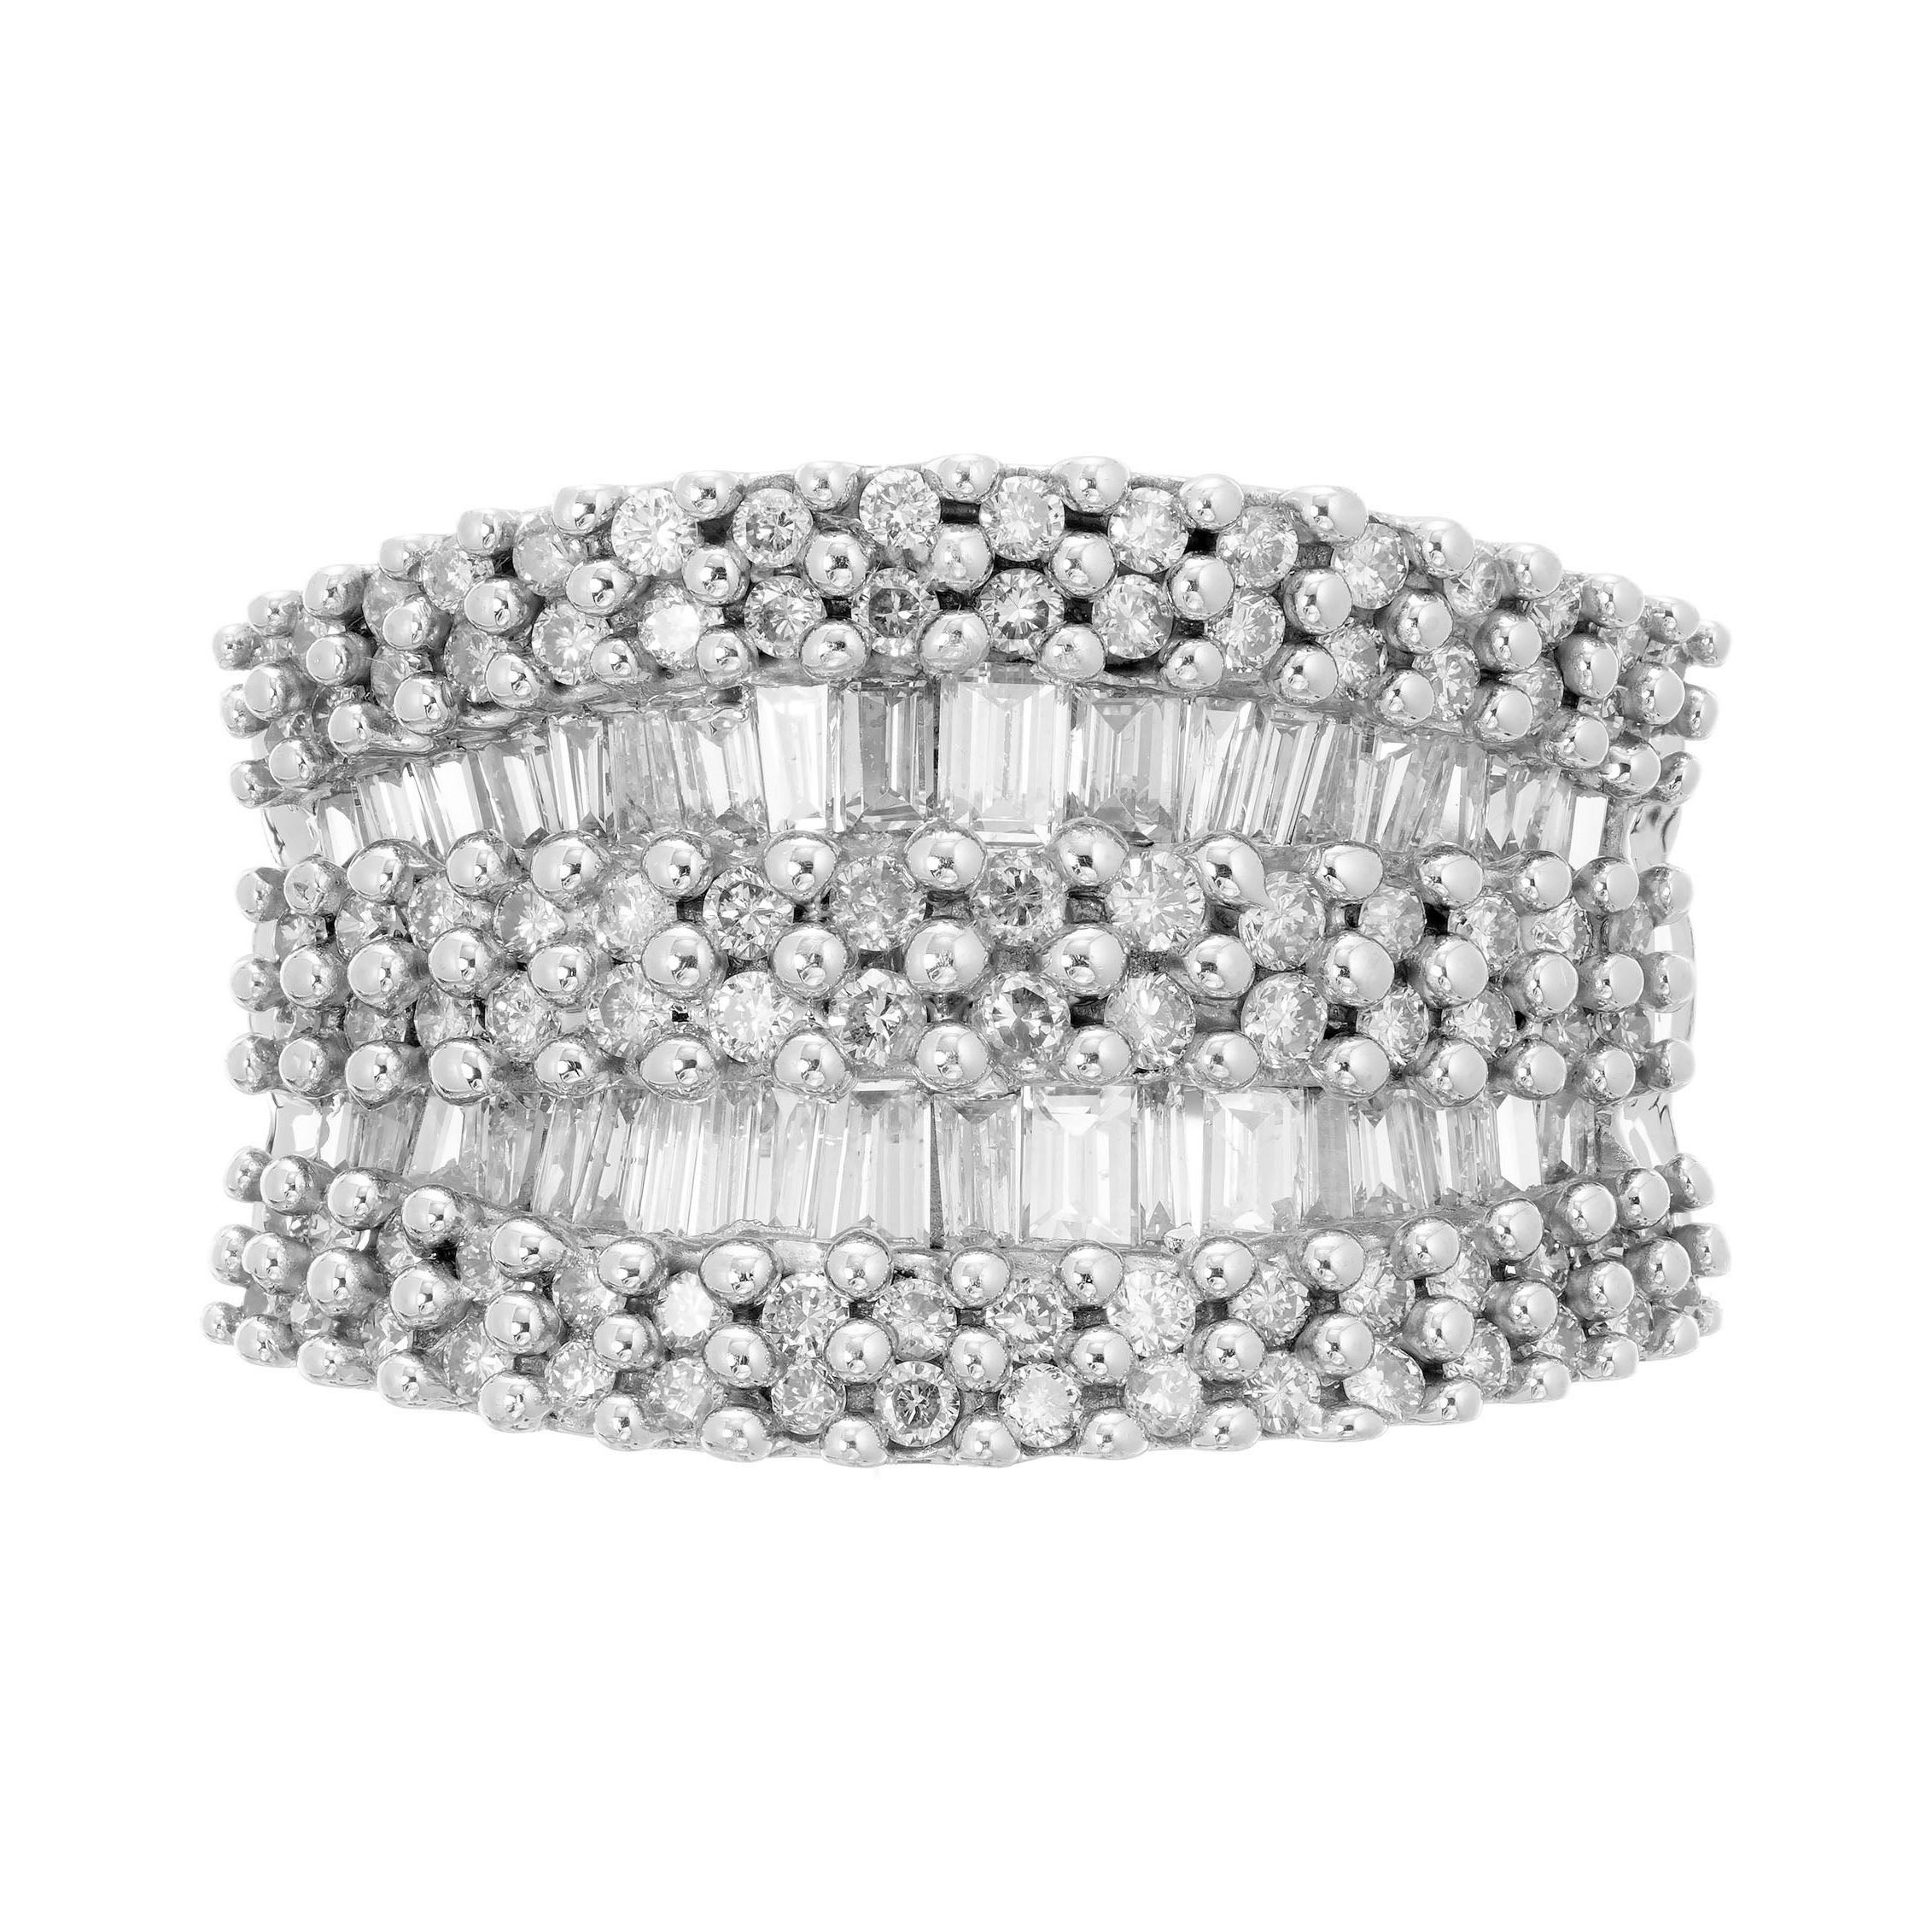 2.10 Carat Diamond Nine Row Wide Gold Band Cluster Ring